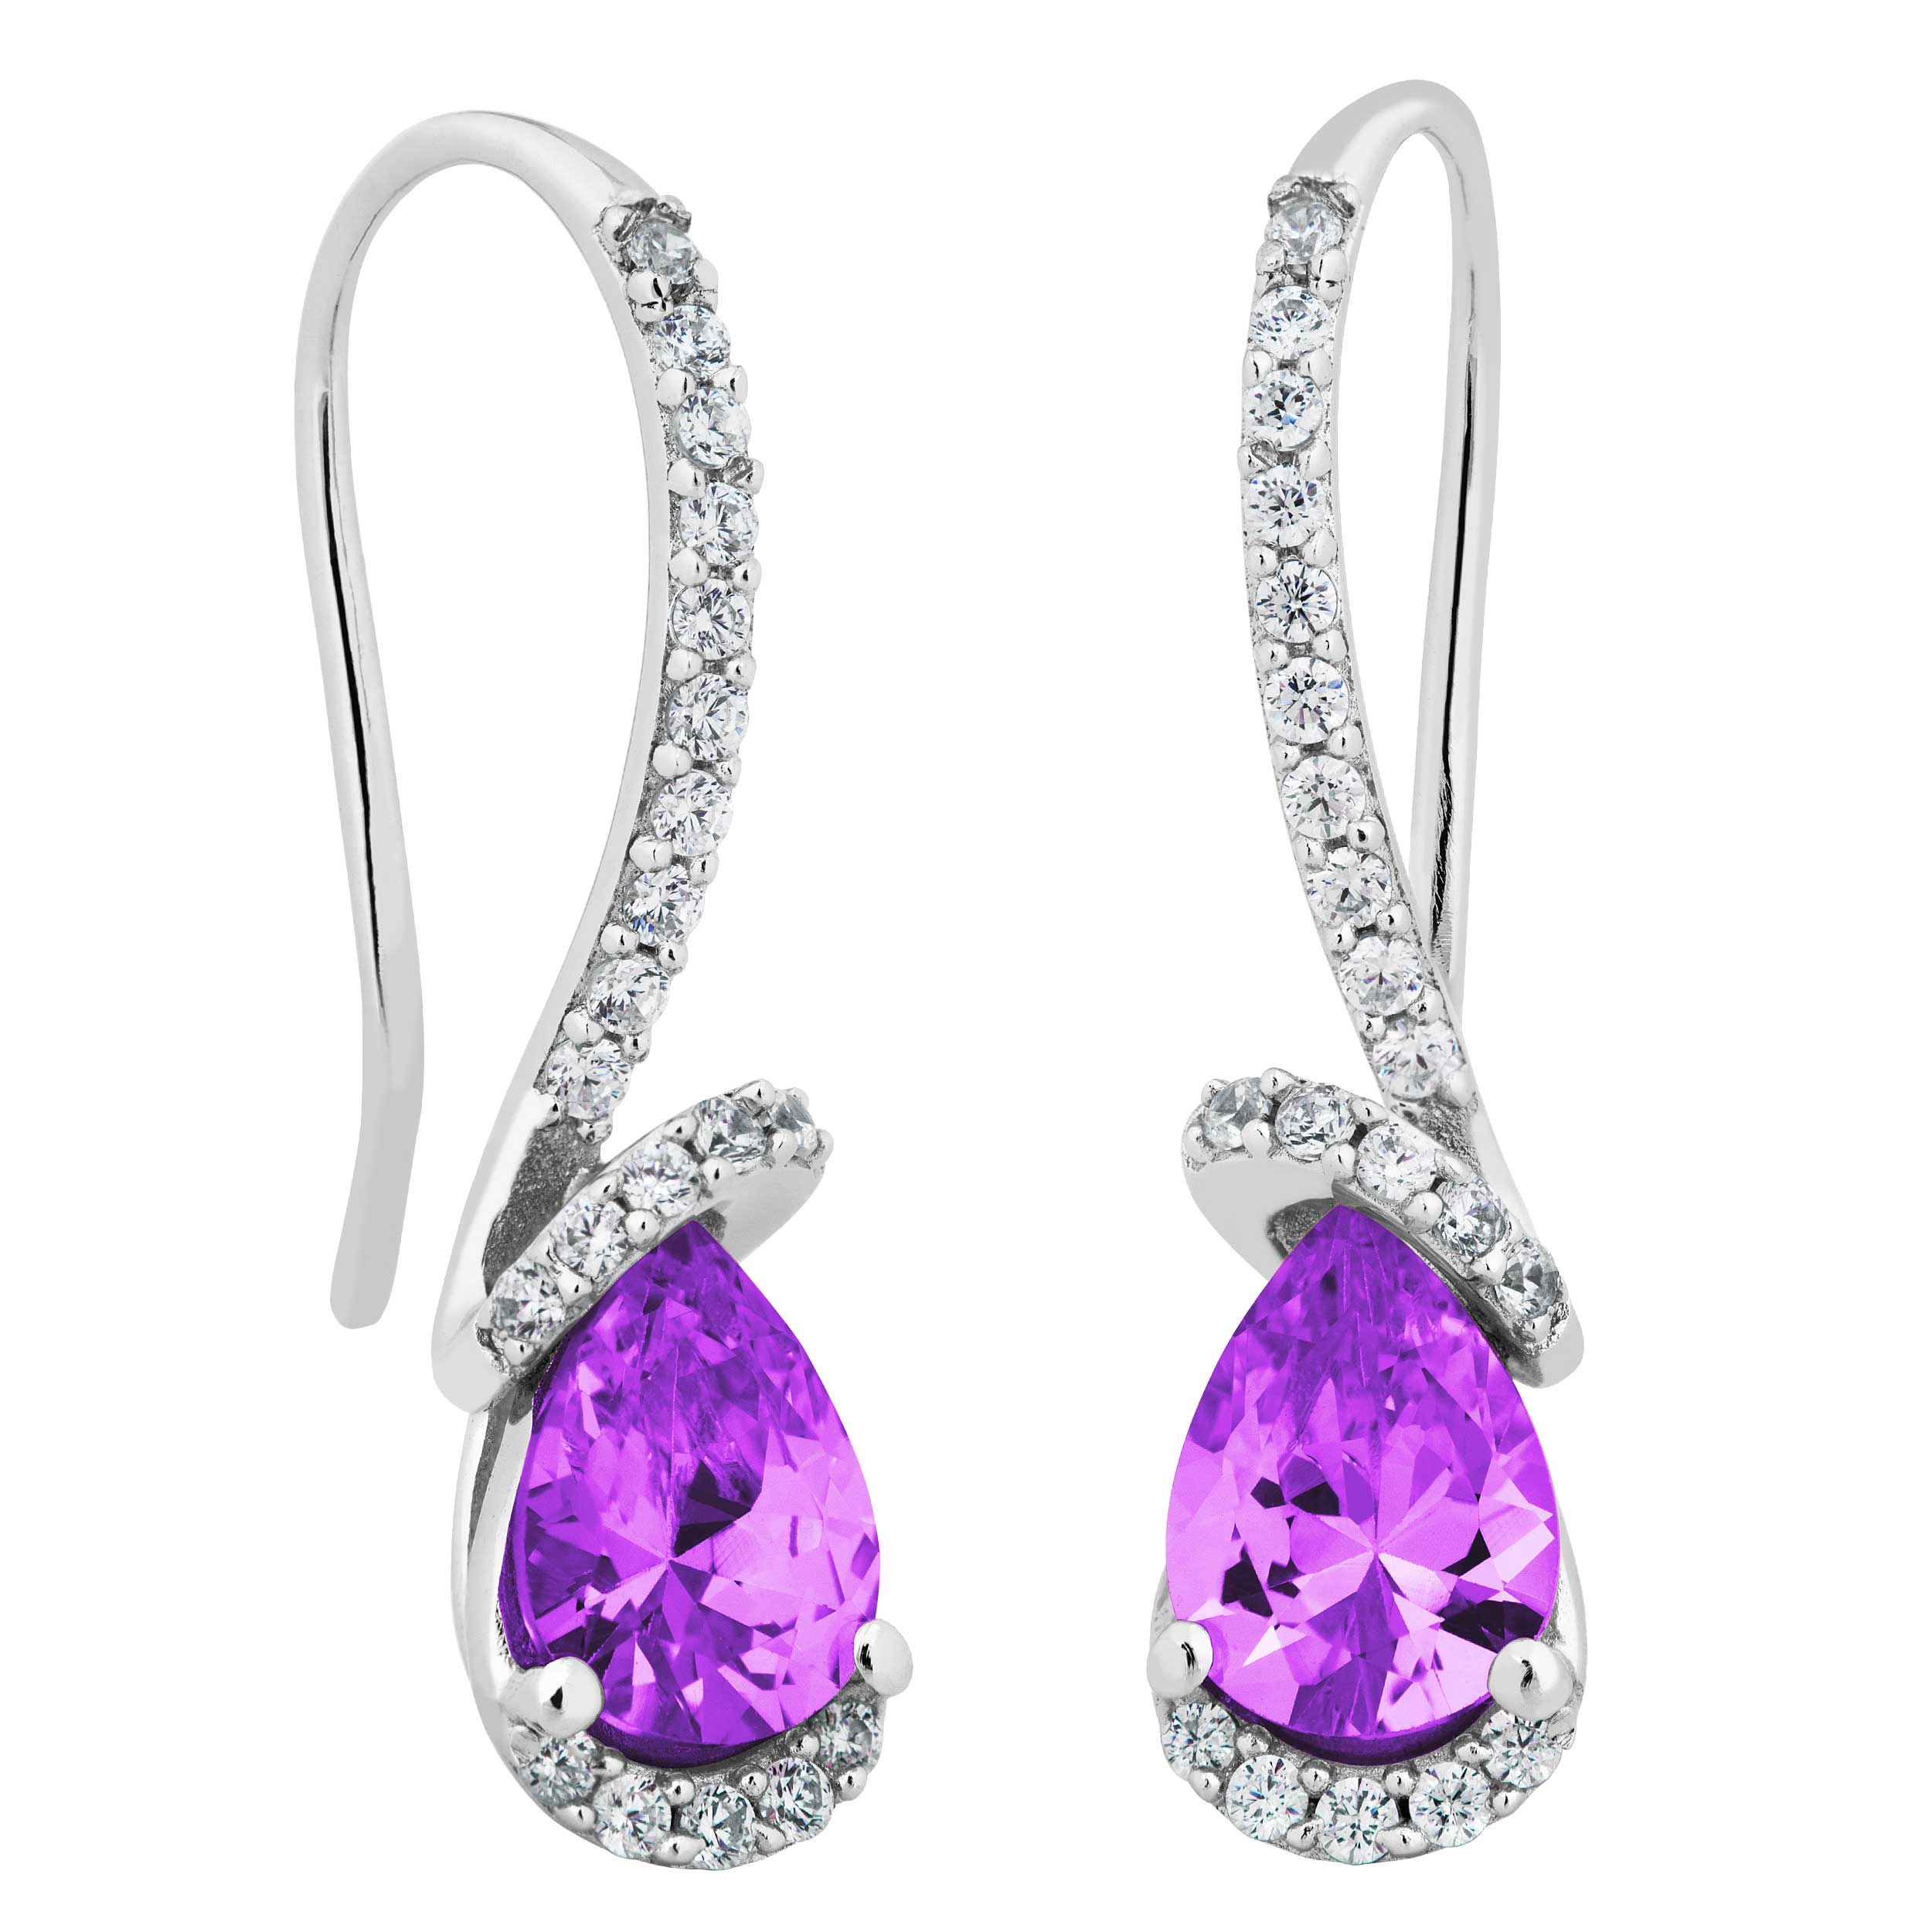 Pear Brazillian Amethyst and White Topaz Earrings, Rhodium Plated Sterling Silver